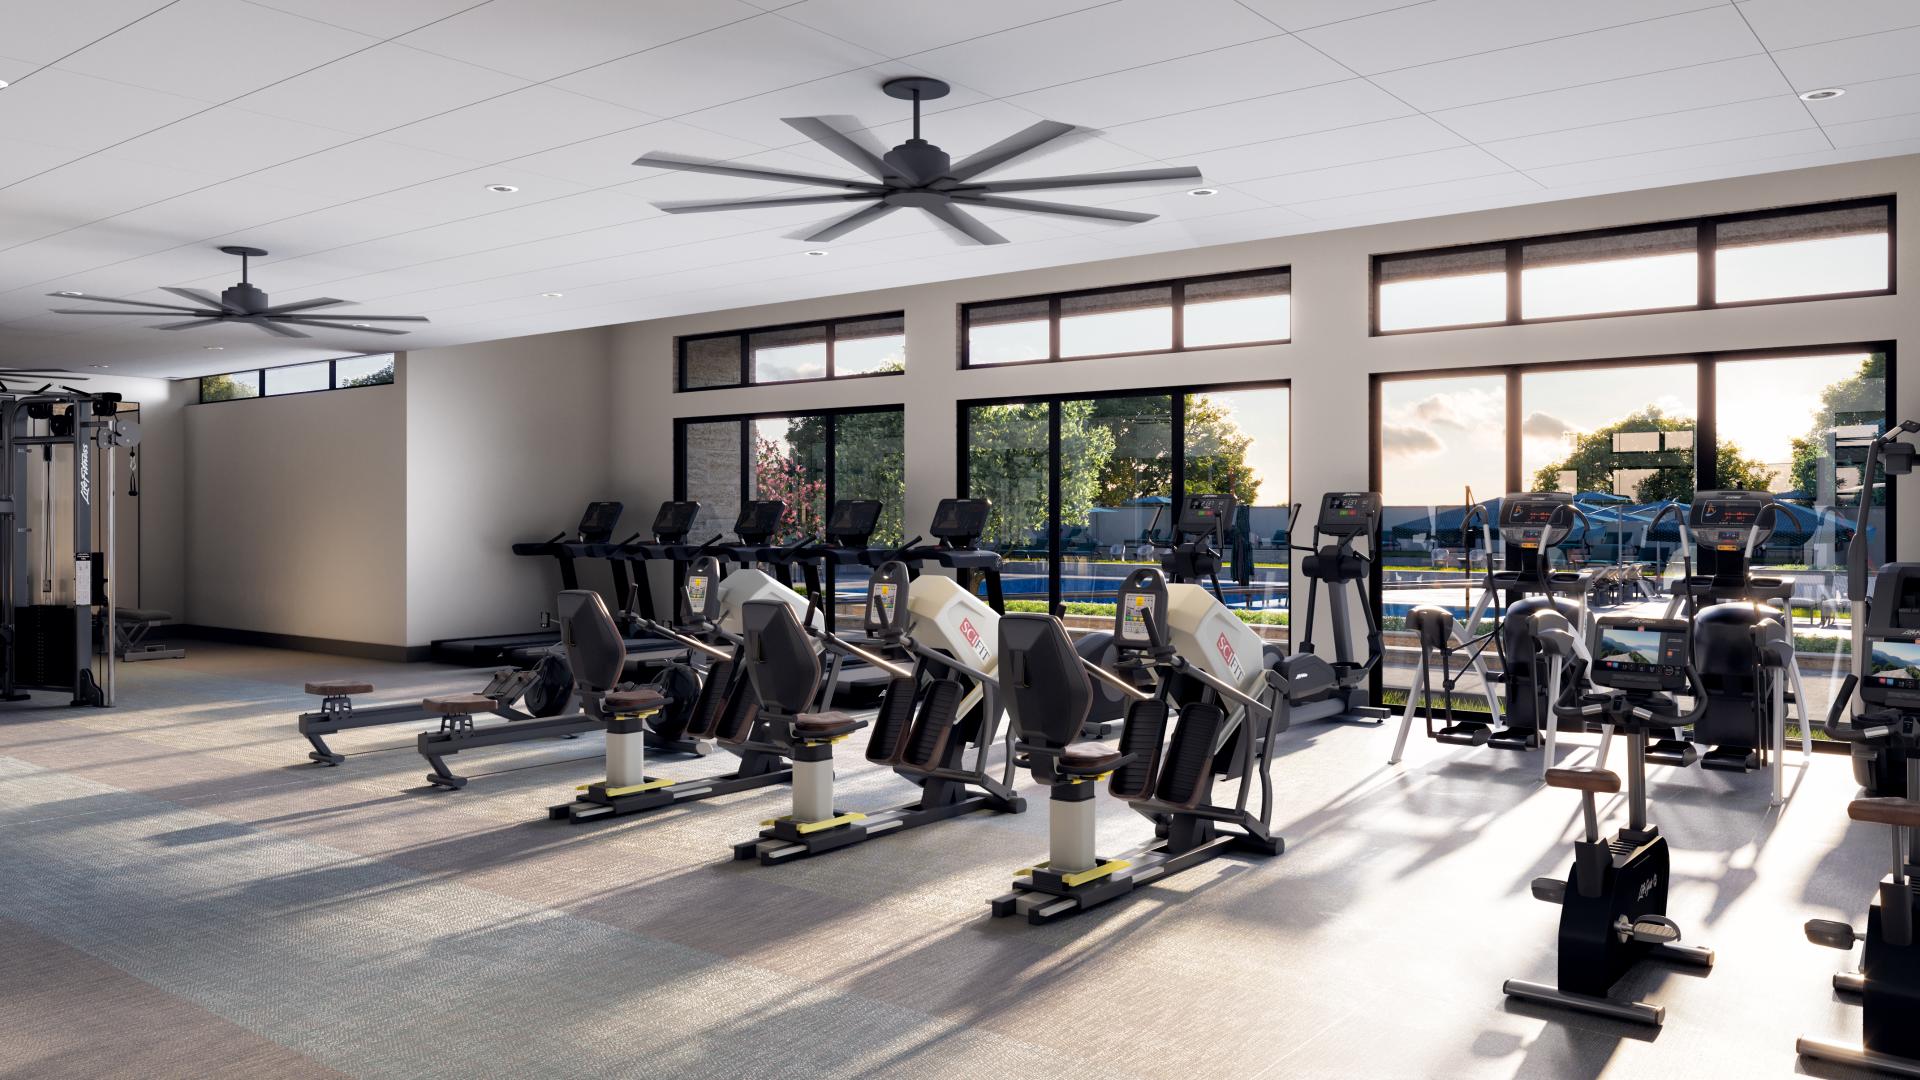 Stay fit at the state-of-art fitness center